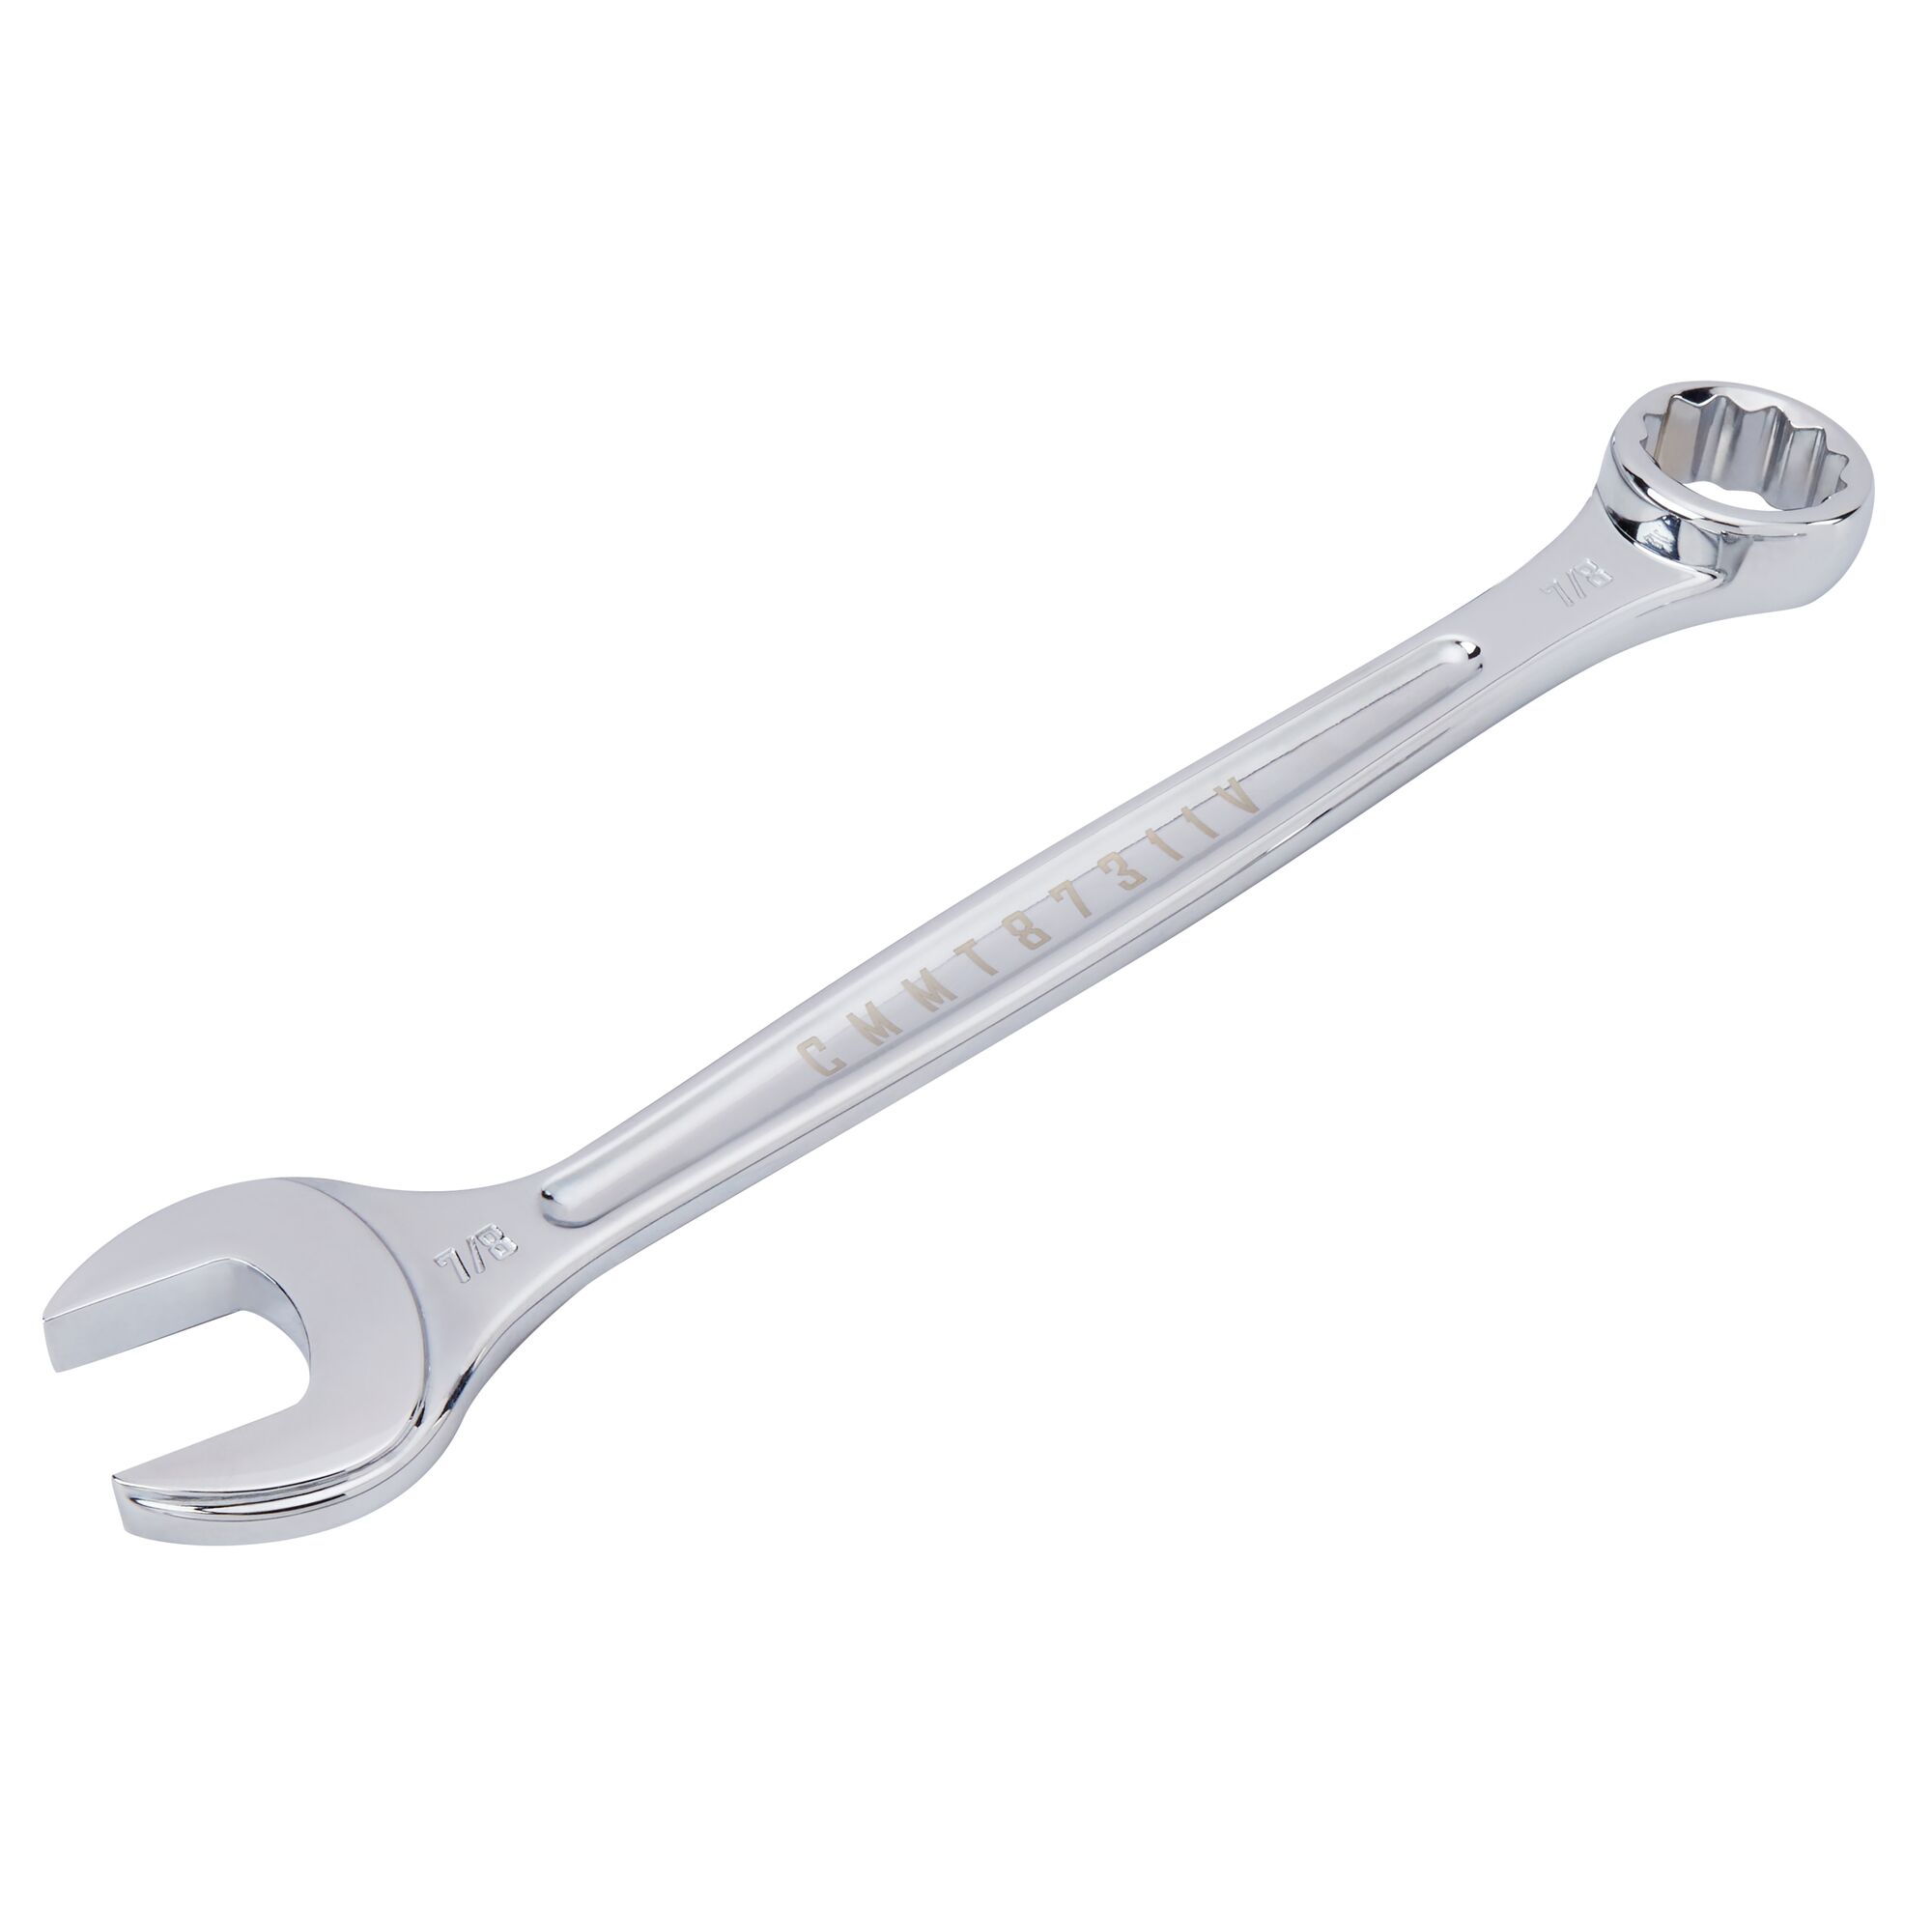 CRAFTSMAN V-SERIES Combo Wrench 7/8 